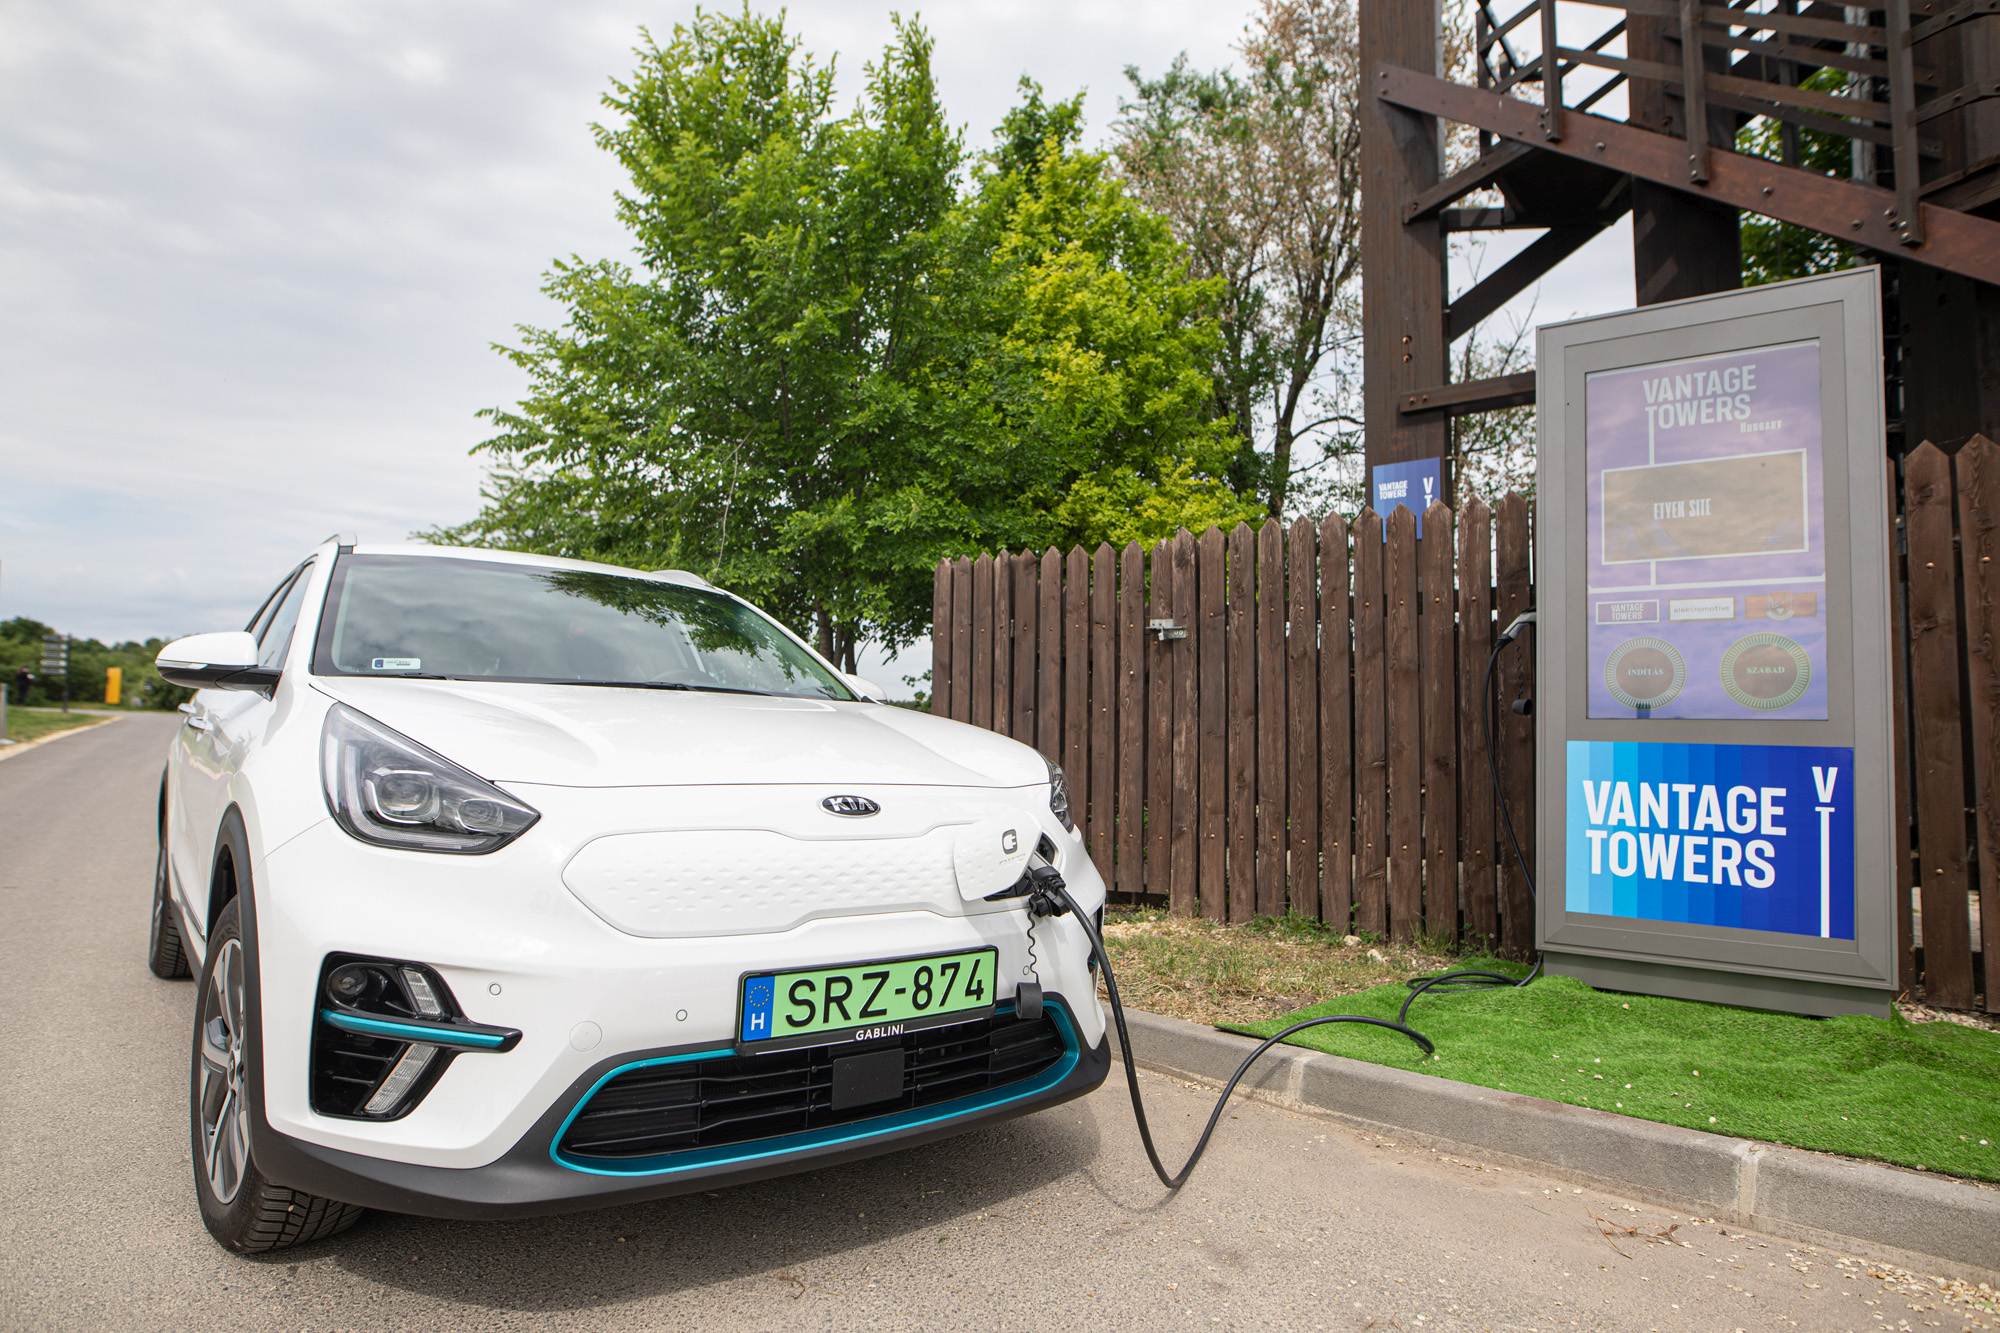 Vodafone’s Vantage Towers to Install EV Chargers Across Hung...